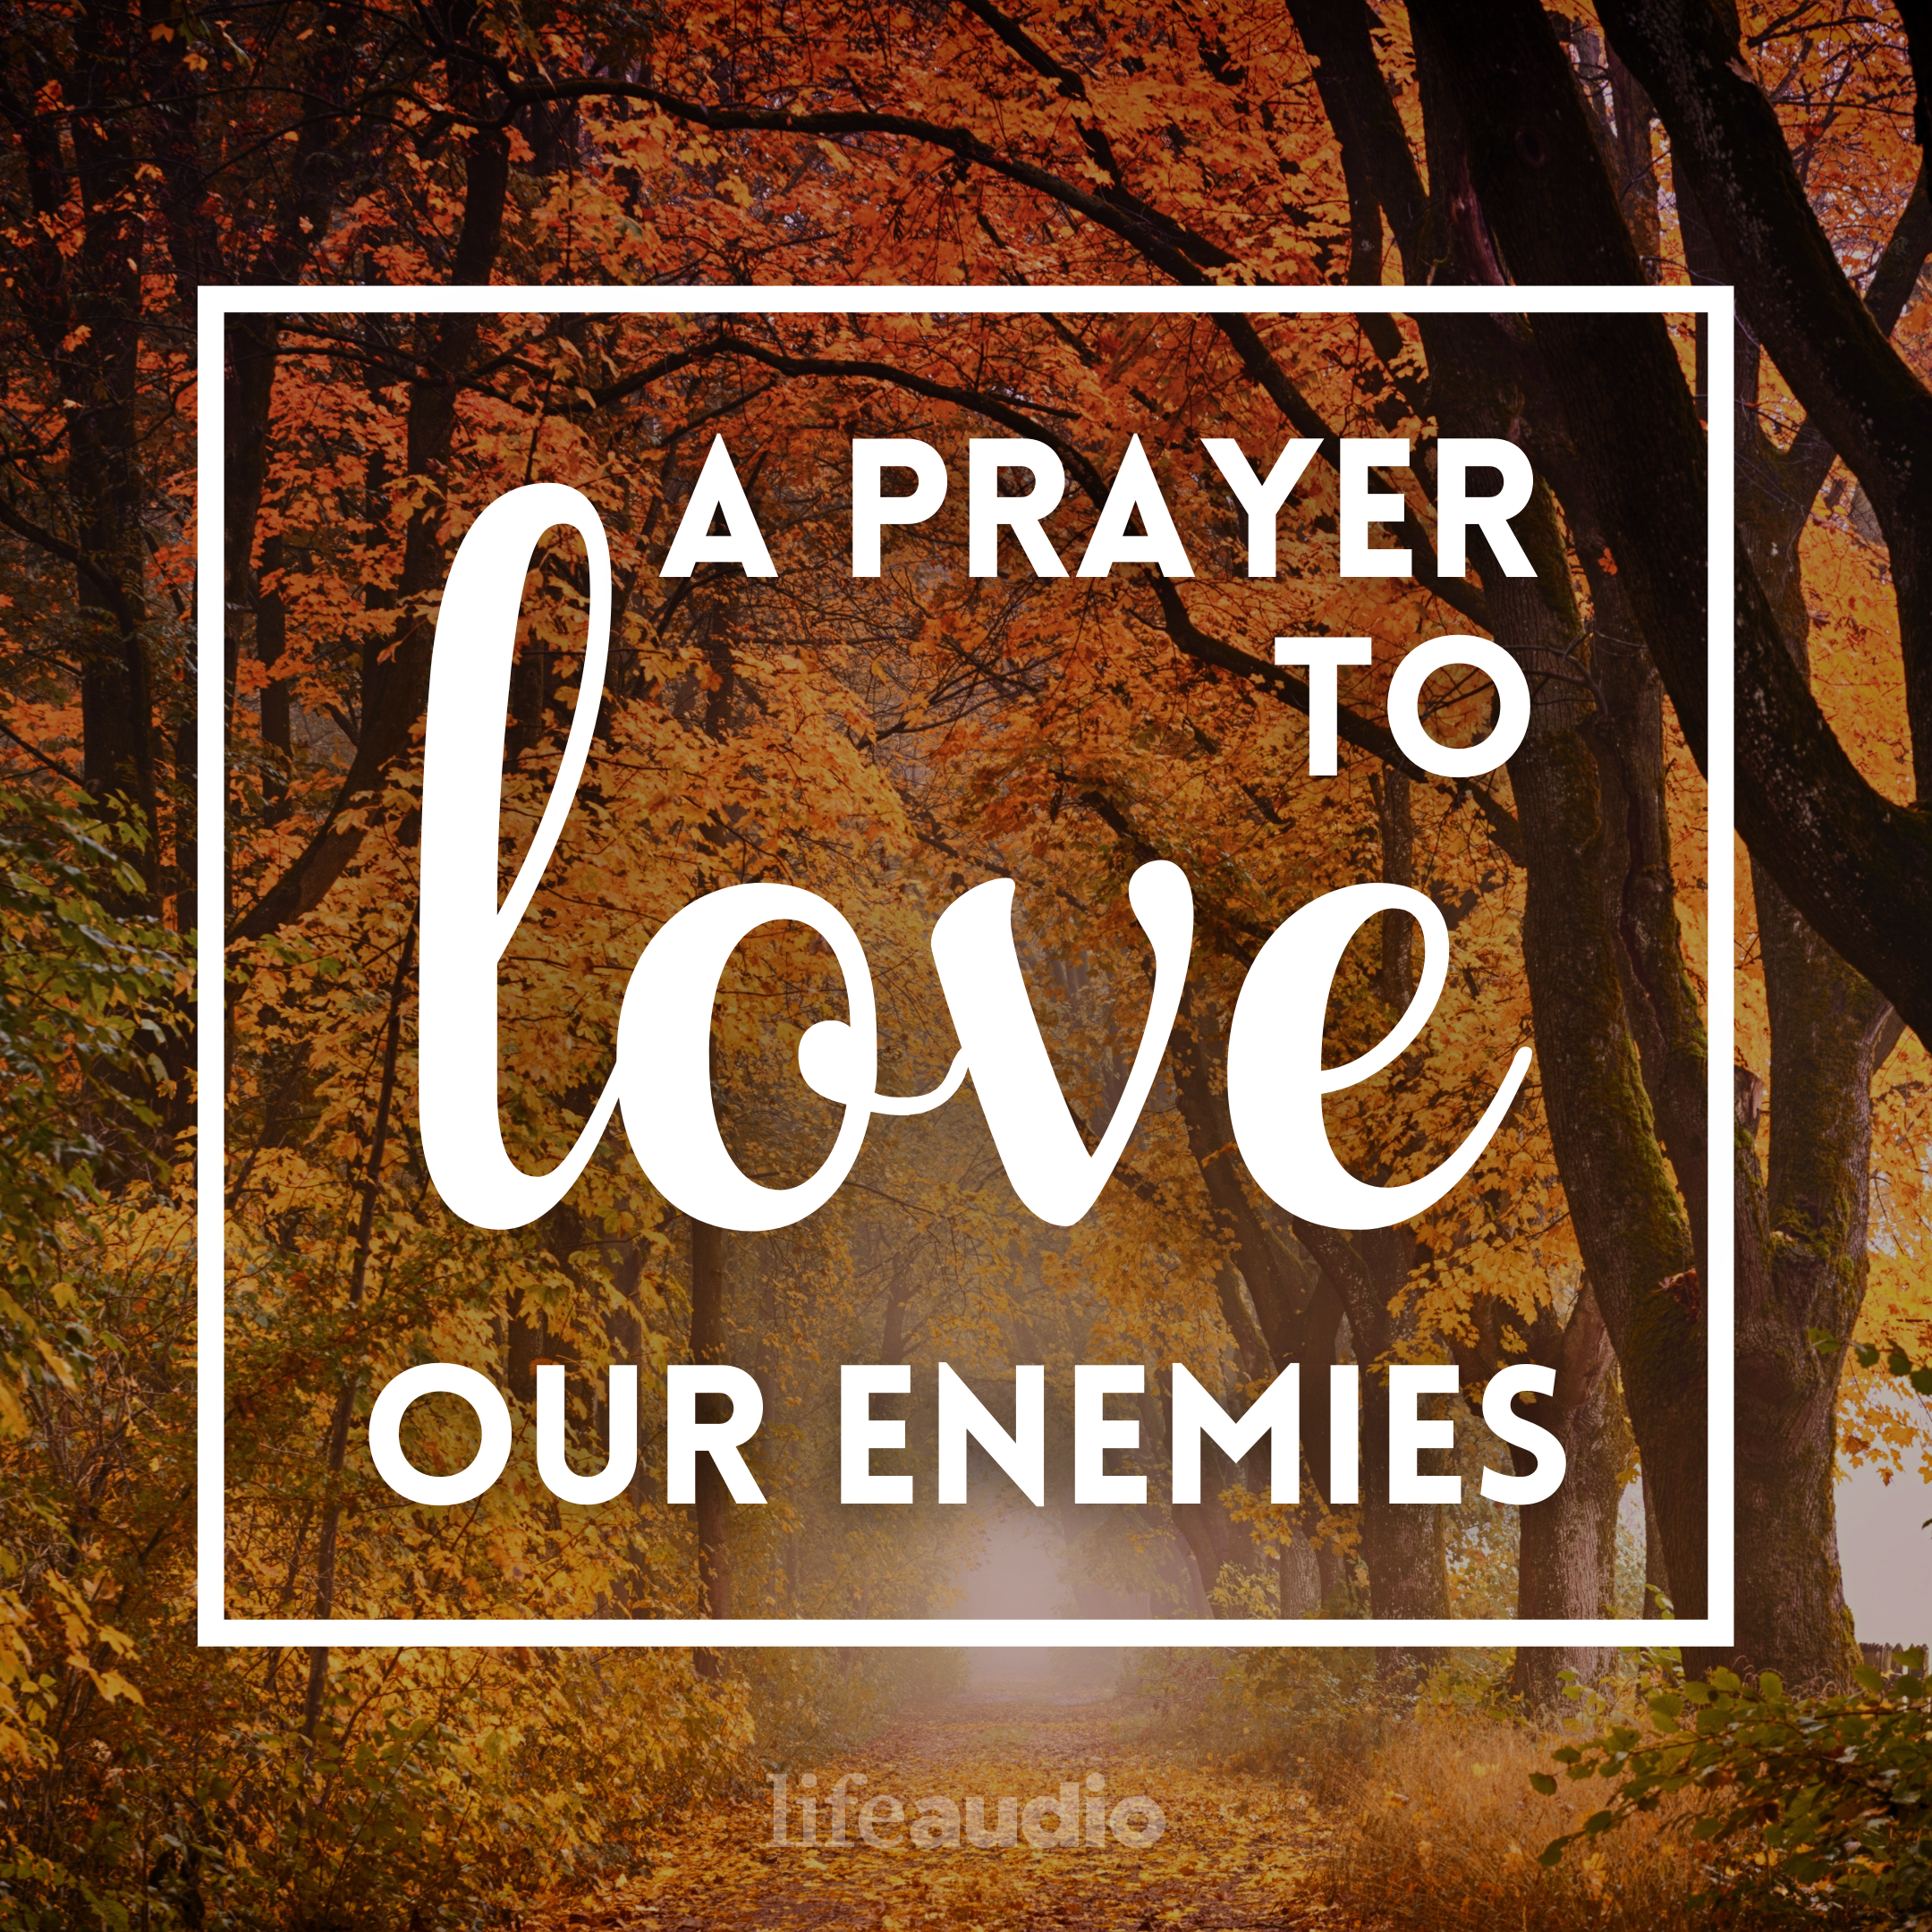 A Prayer to Love Our Enemies